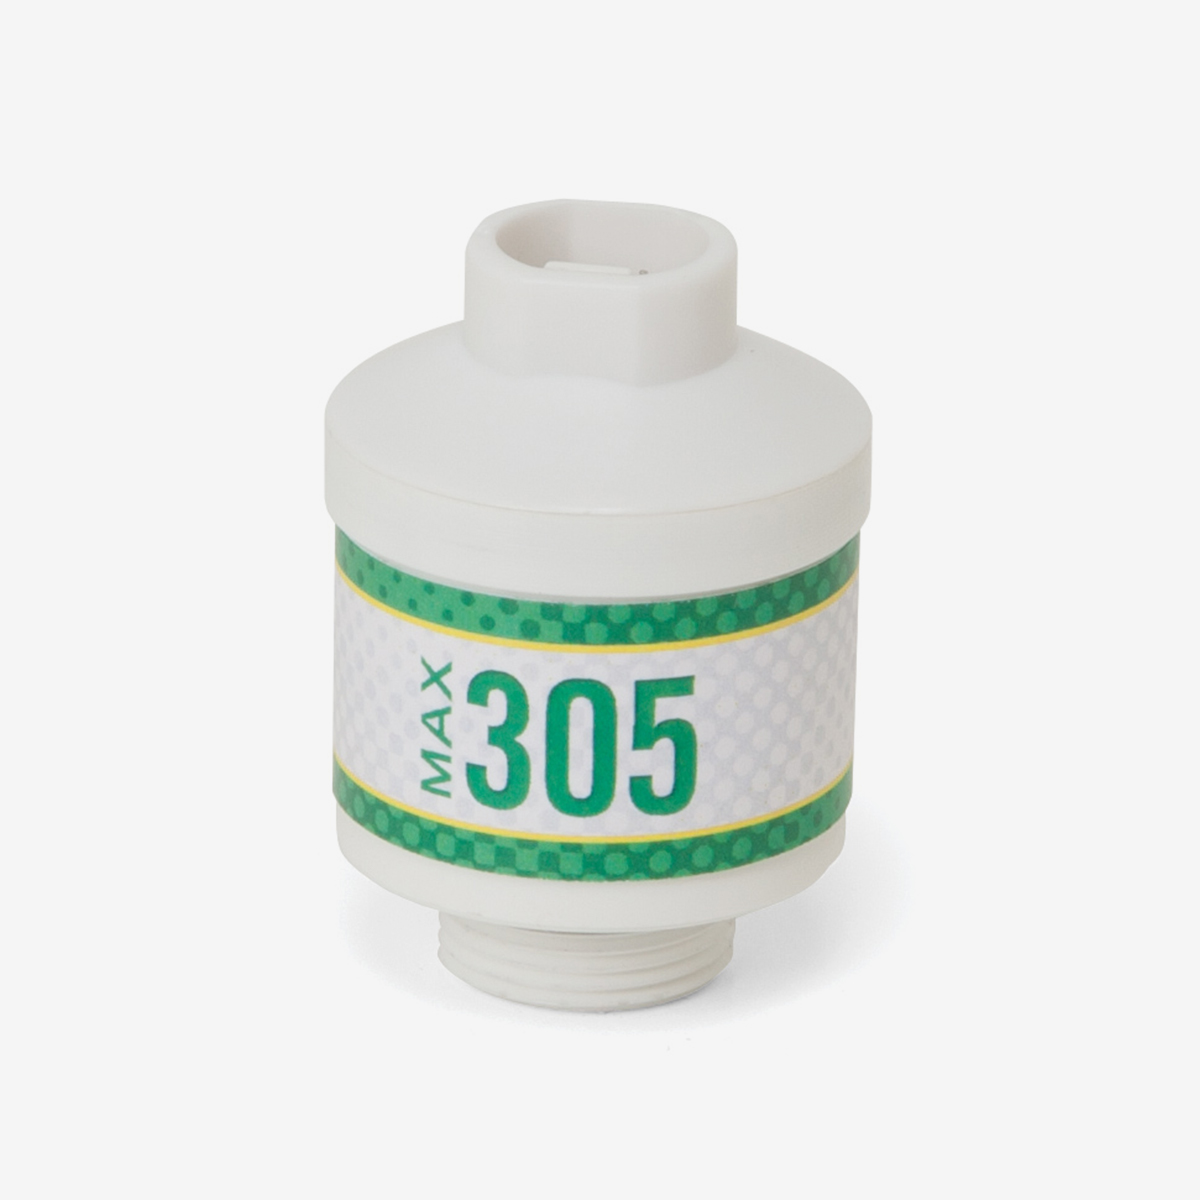 White and green cylindrical Max-305 scuba sensor on white background